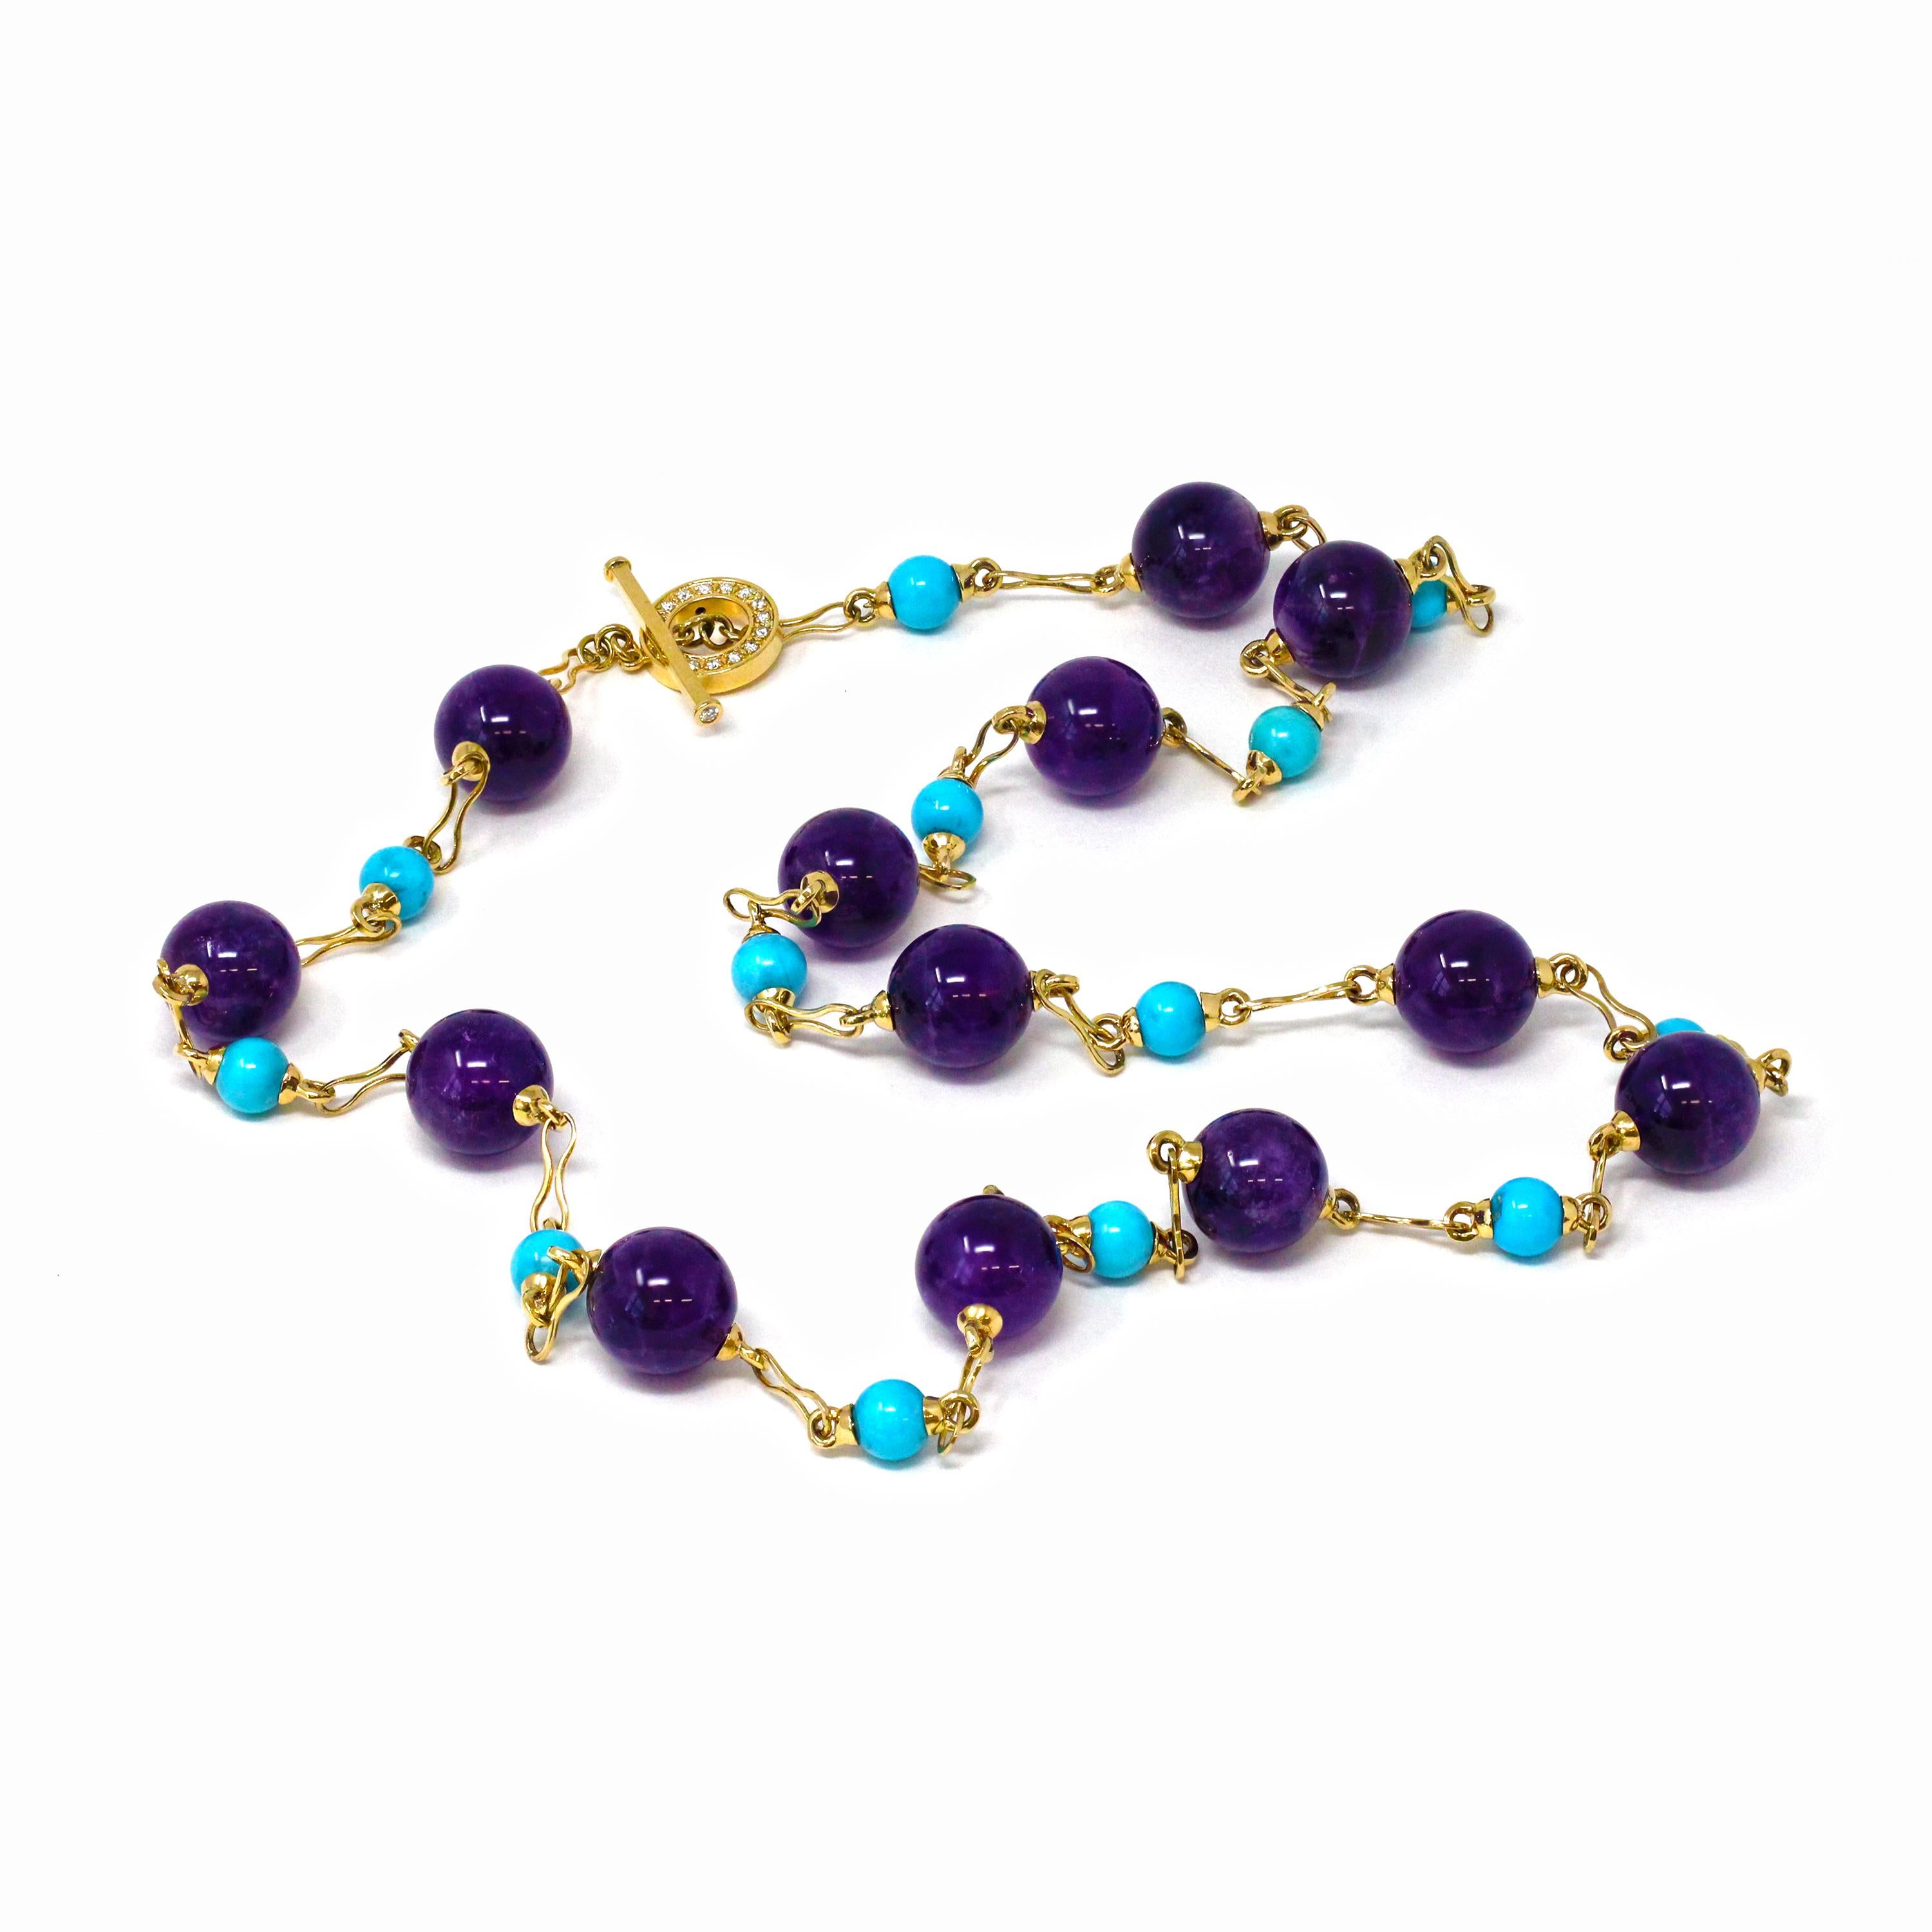 A signed Rosaria Varra long station necklace featuring alternated natural turquoise round beads measuring 8-9mm and amethyst round beads measuring 16mm, set in 18k yellow gold with a 0.54 carat of GH color and VS-SI clarity diamond clasp made into a